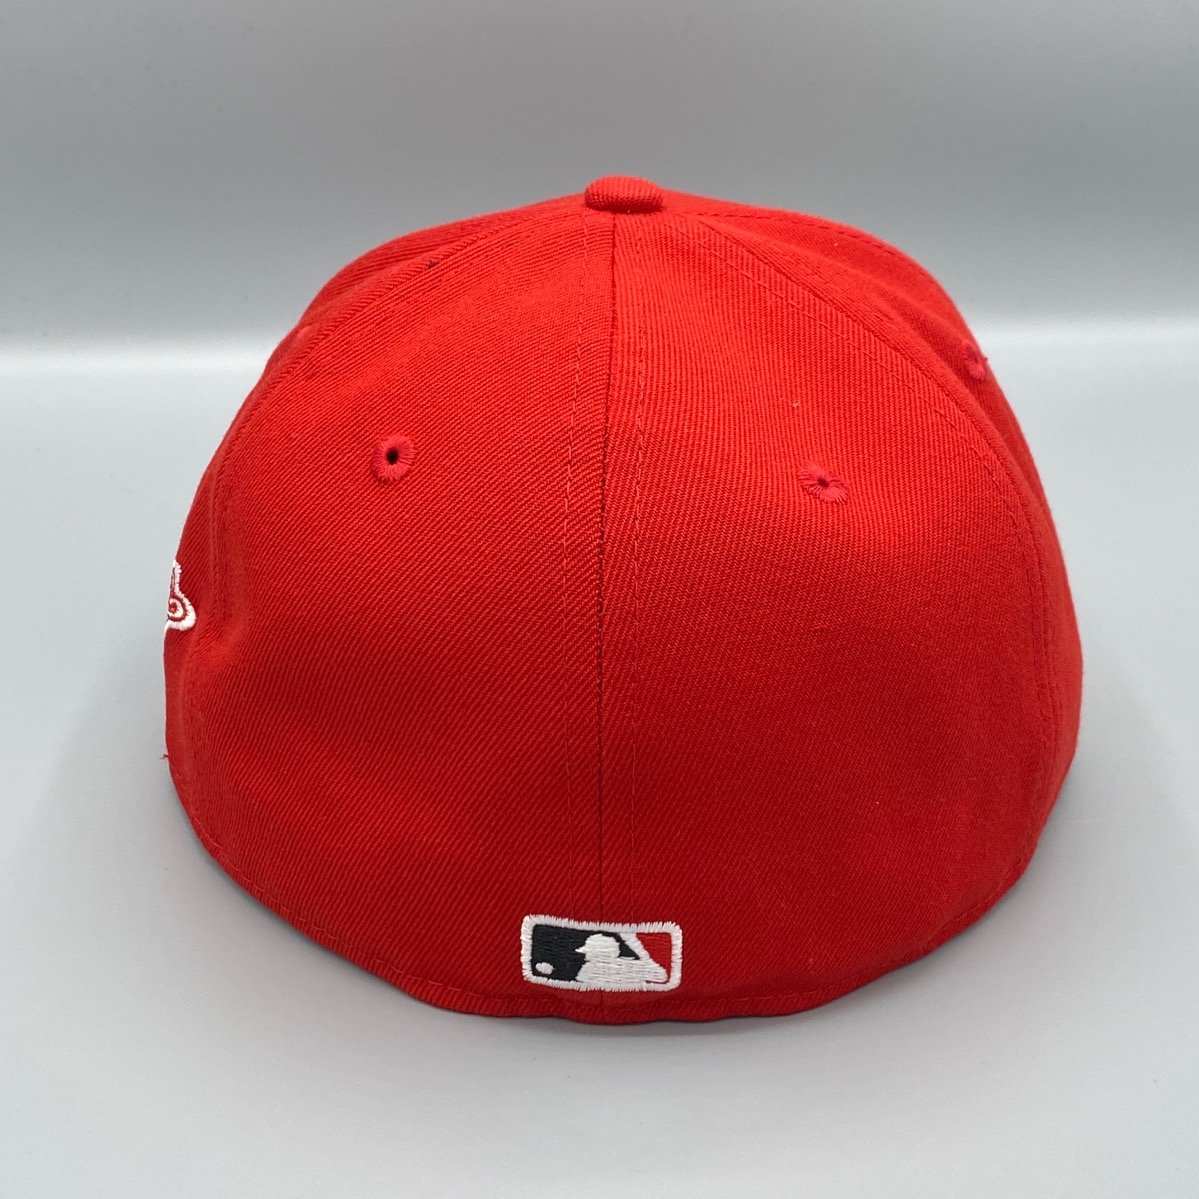 Cincinnati Reds 1940 World Series Logo History Fitted Cap (Navy/Red)